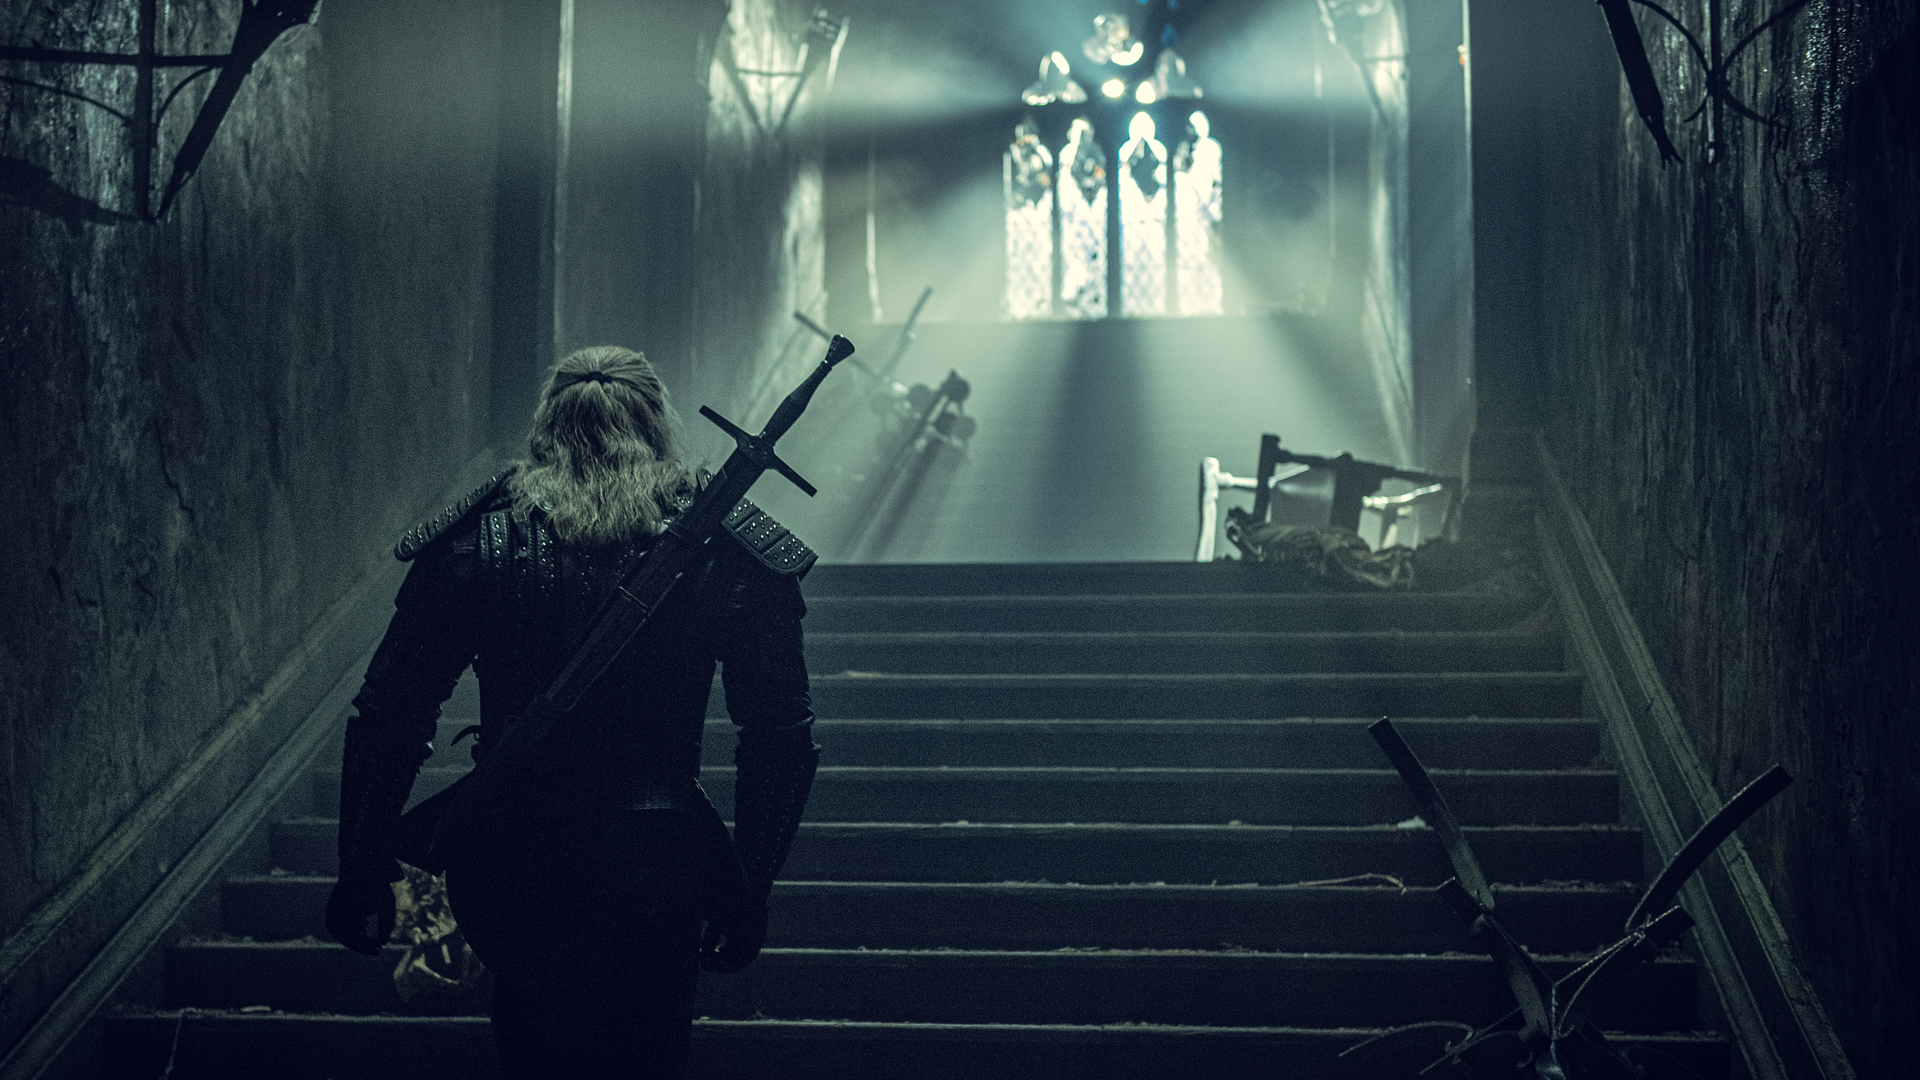 The Witcher Production Still From the Netflix Show